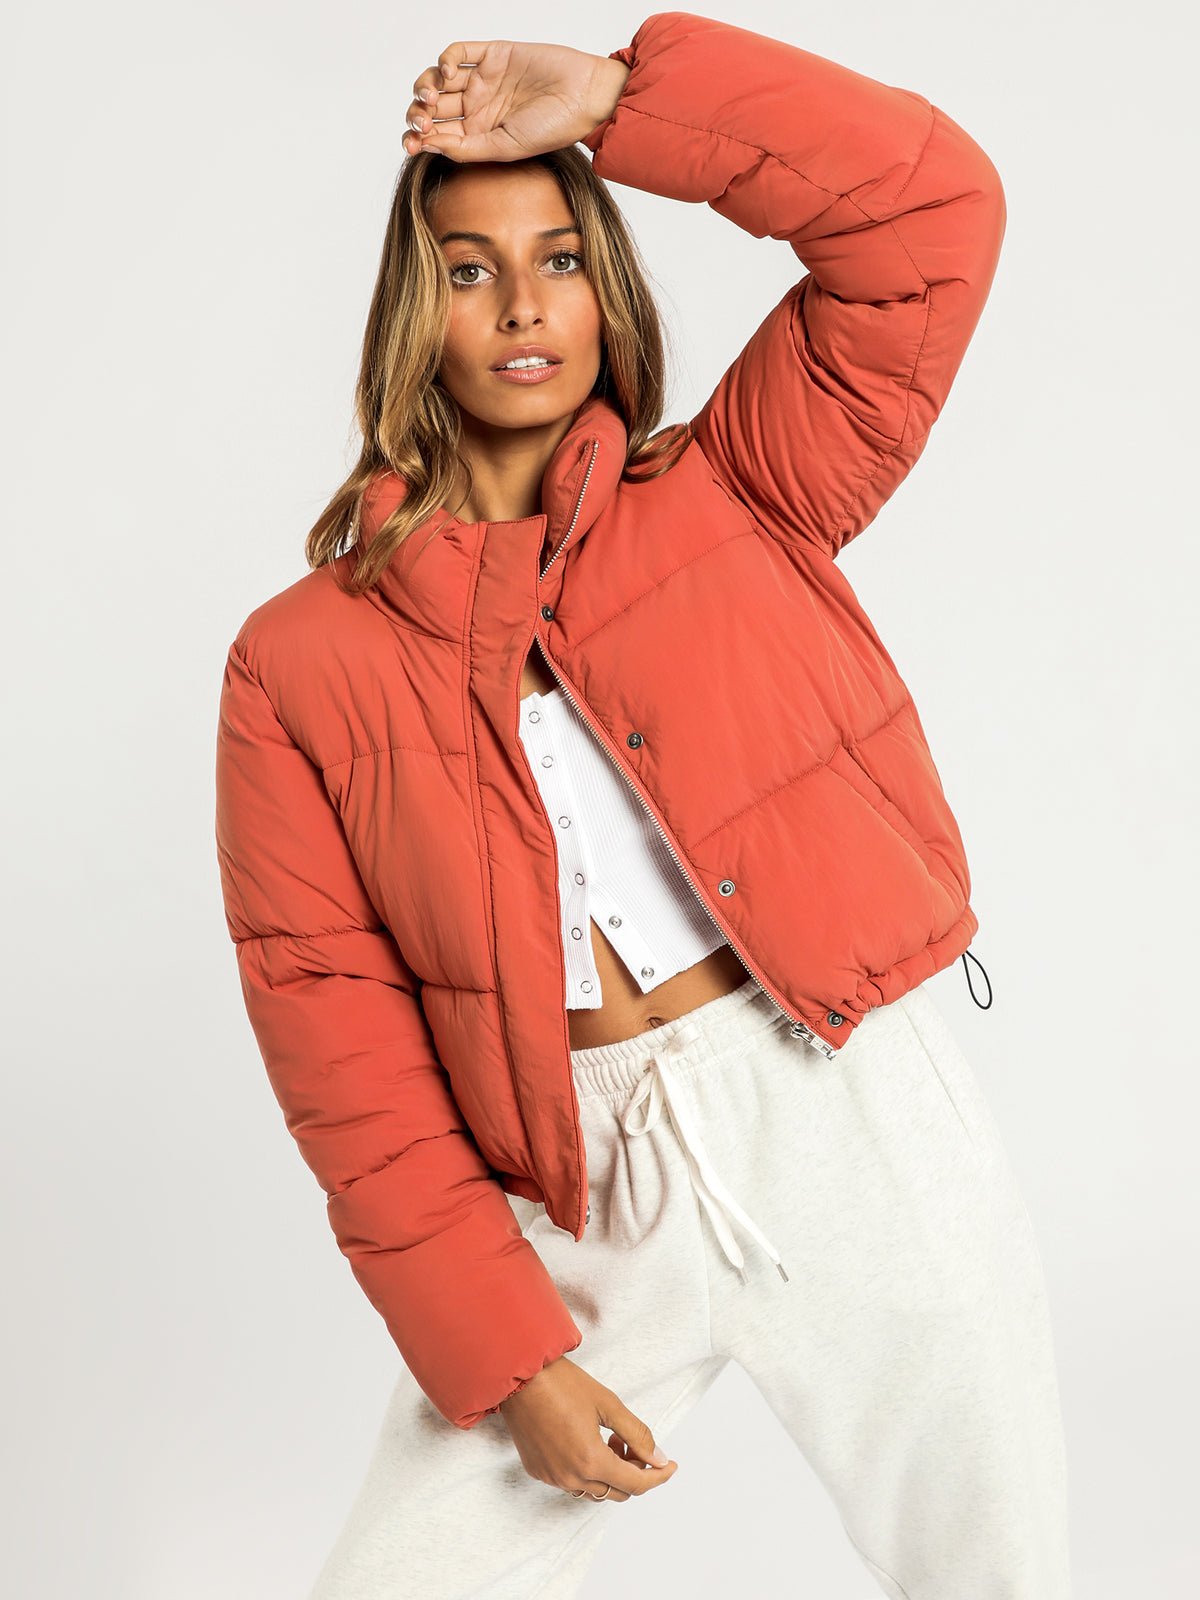 Topher Puffer Jacket in Auburn Red